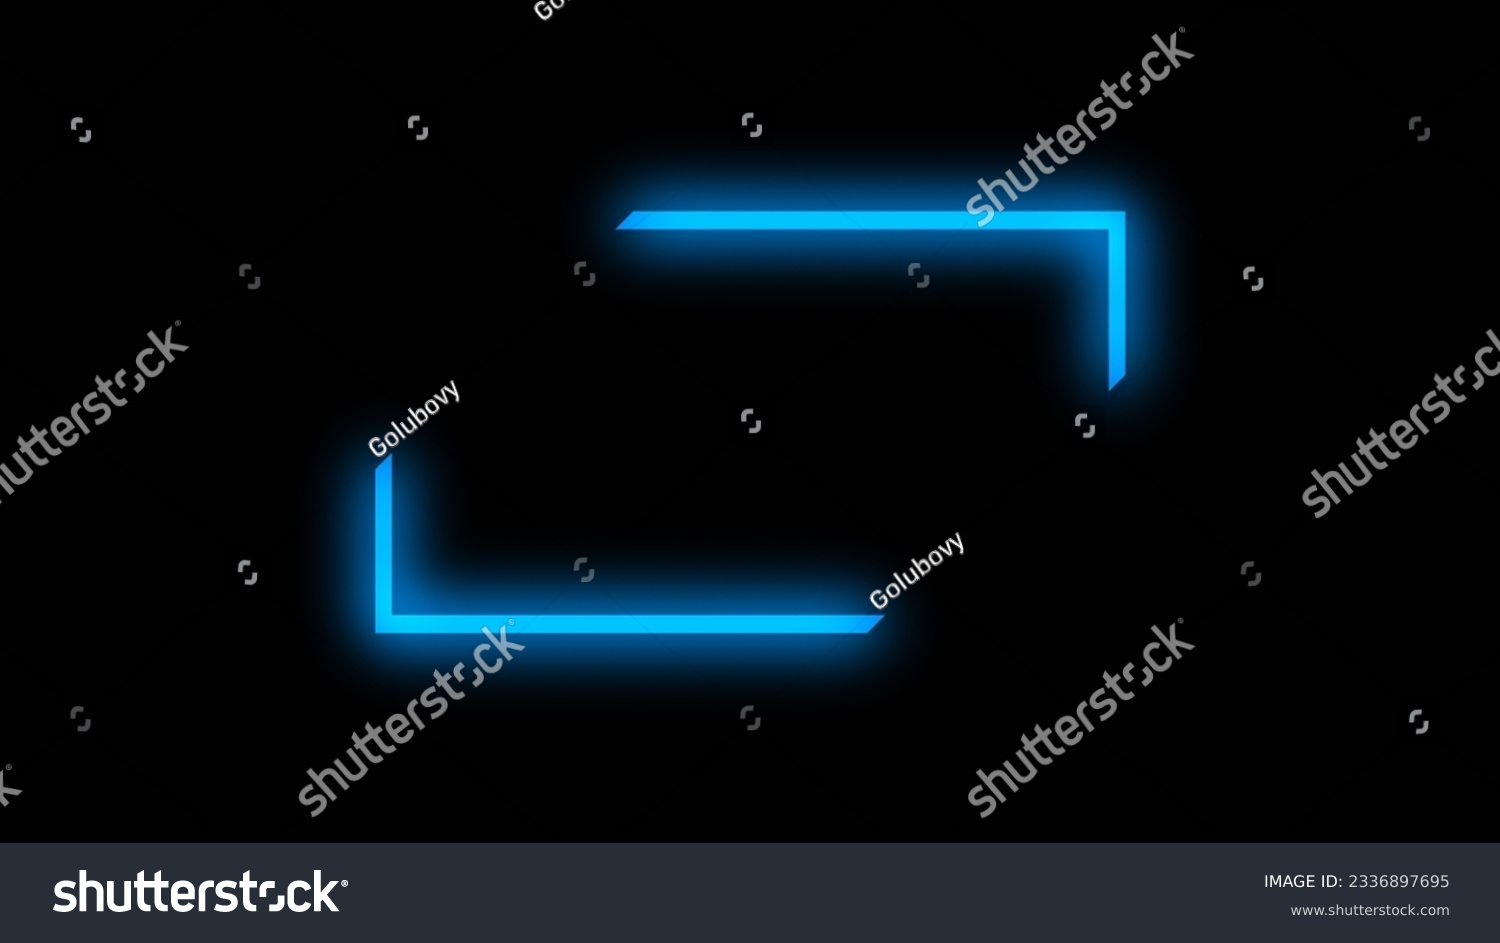 Blur neon frame. Glowing background. Defocused blue color led light flare square angle corners design on dark black abstract geometric empty space. #2336897695